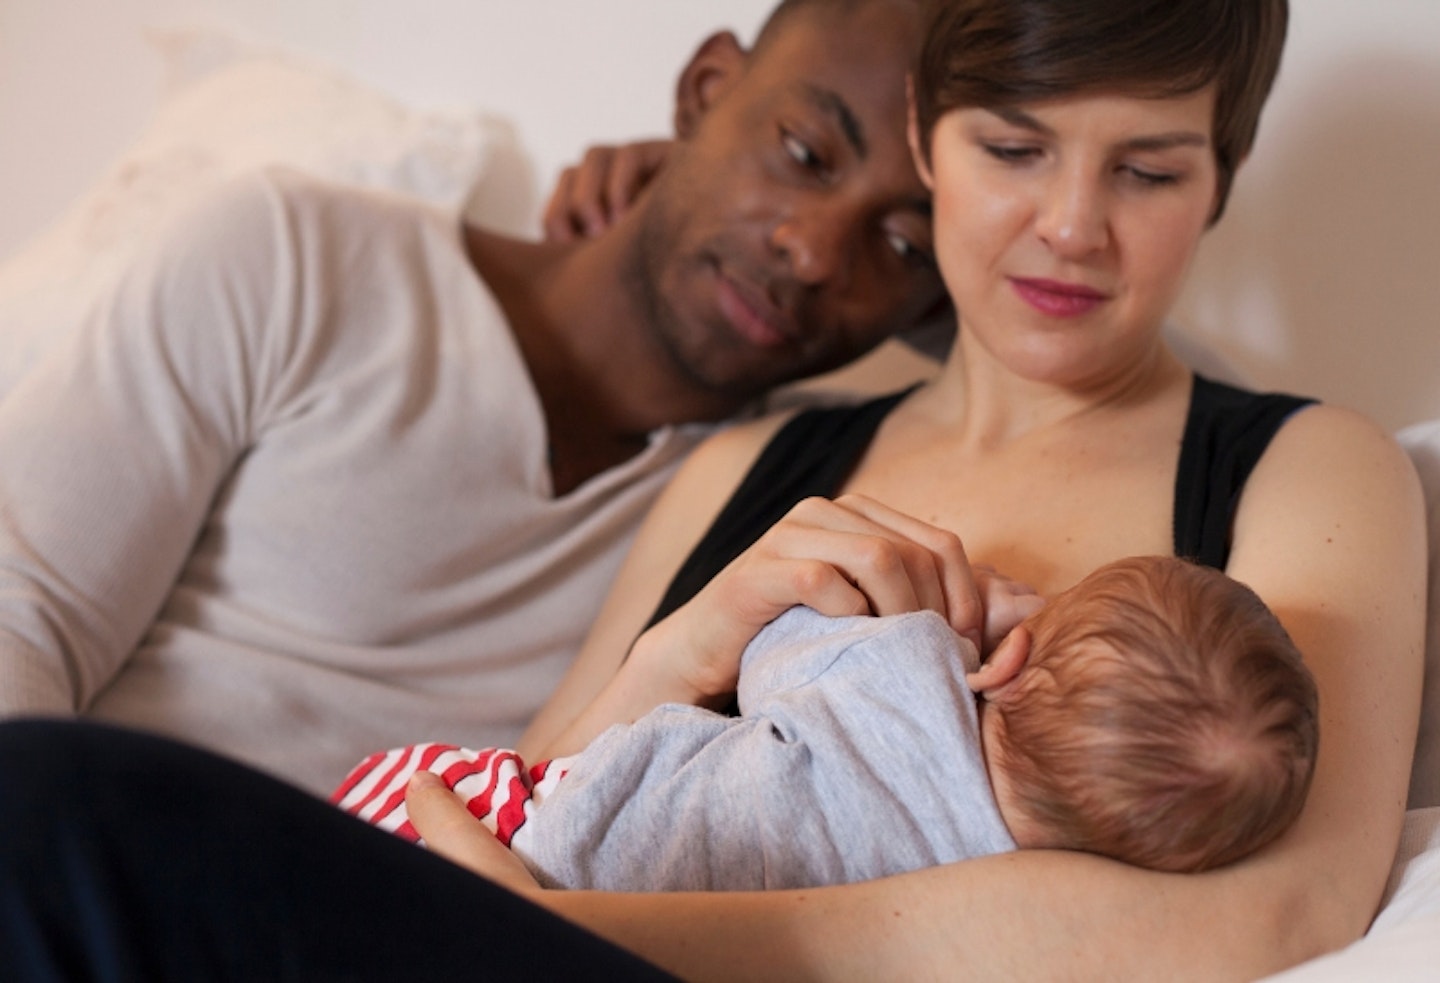 https://images.bauerhosting.com/affiliates/sites/12/motherandbaby/legacy/root/how-to-stop-breastfeeding-stopping-breast-milk-pressure.jpg?auto=format&w=1440&q=80